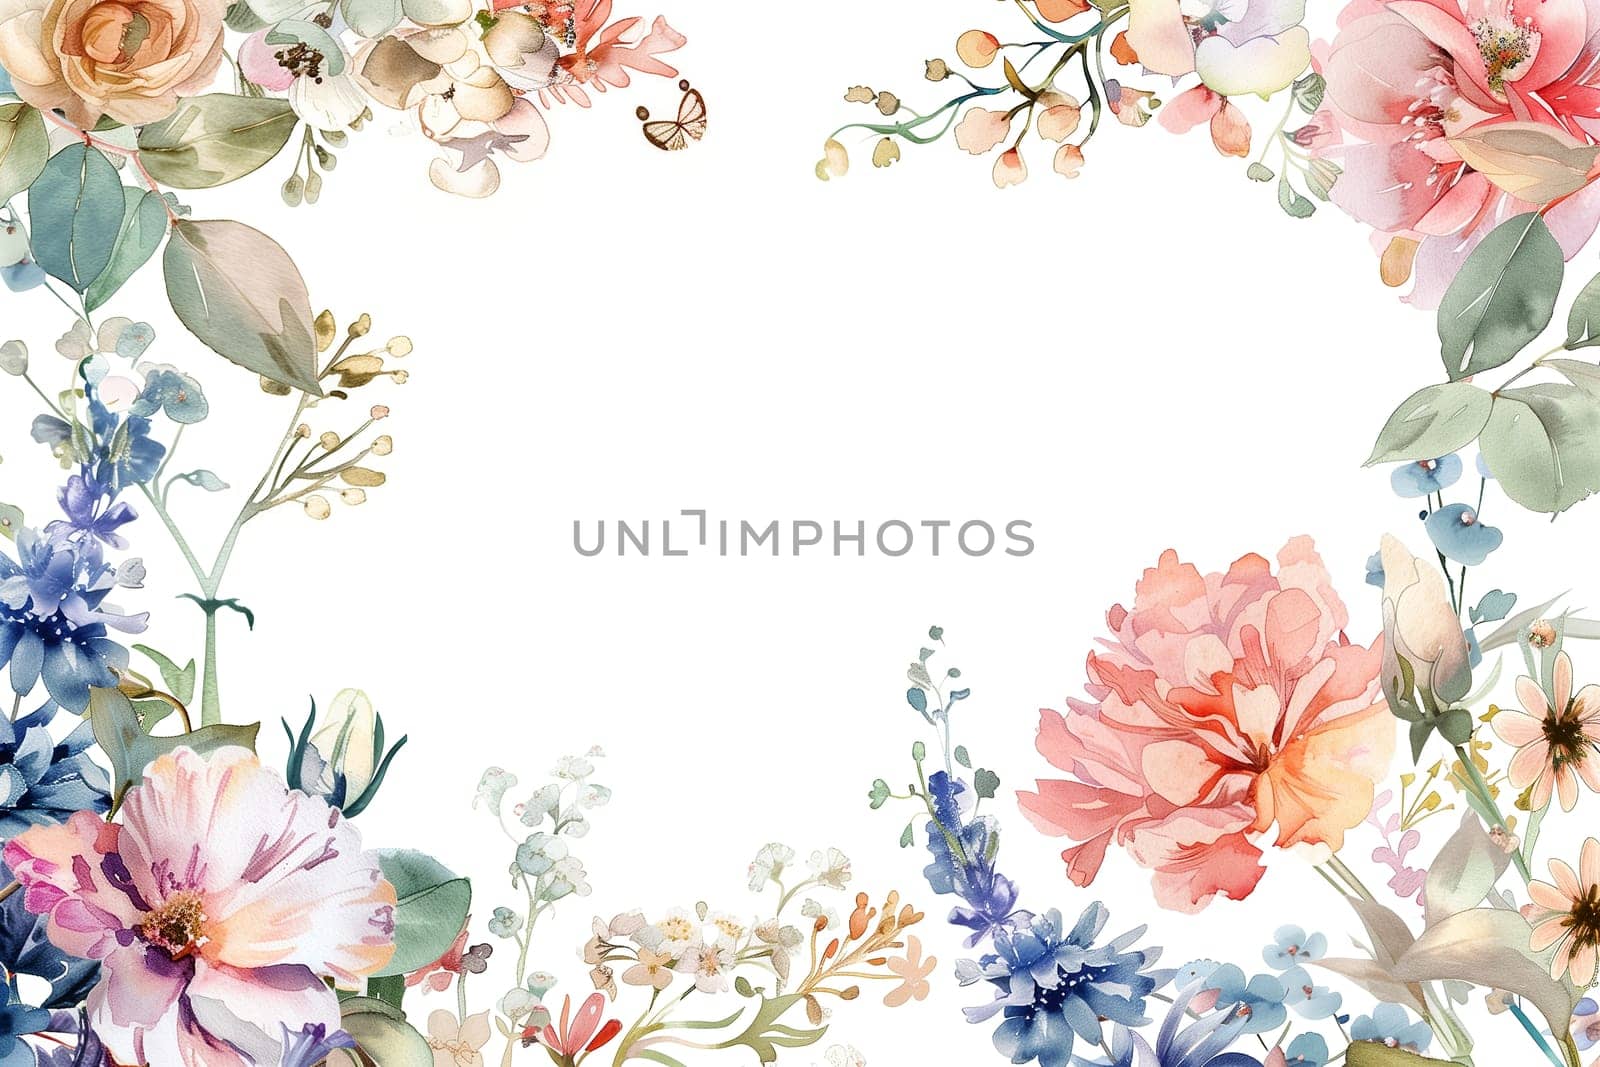 watercolor painting of a flowery border with a white background by Dustick